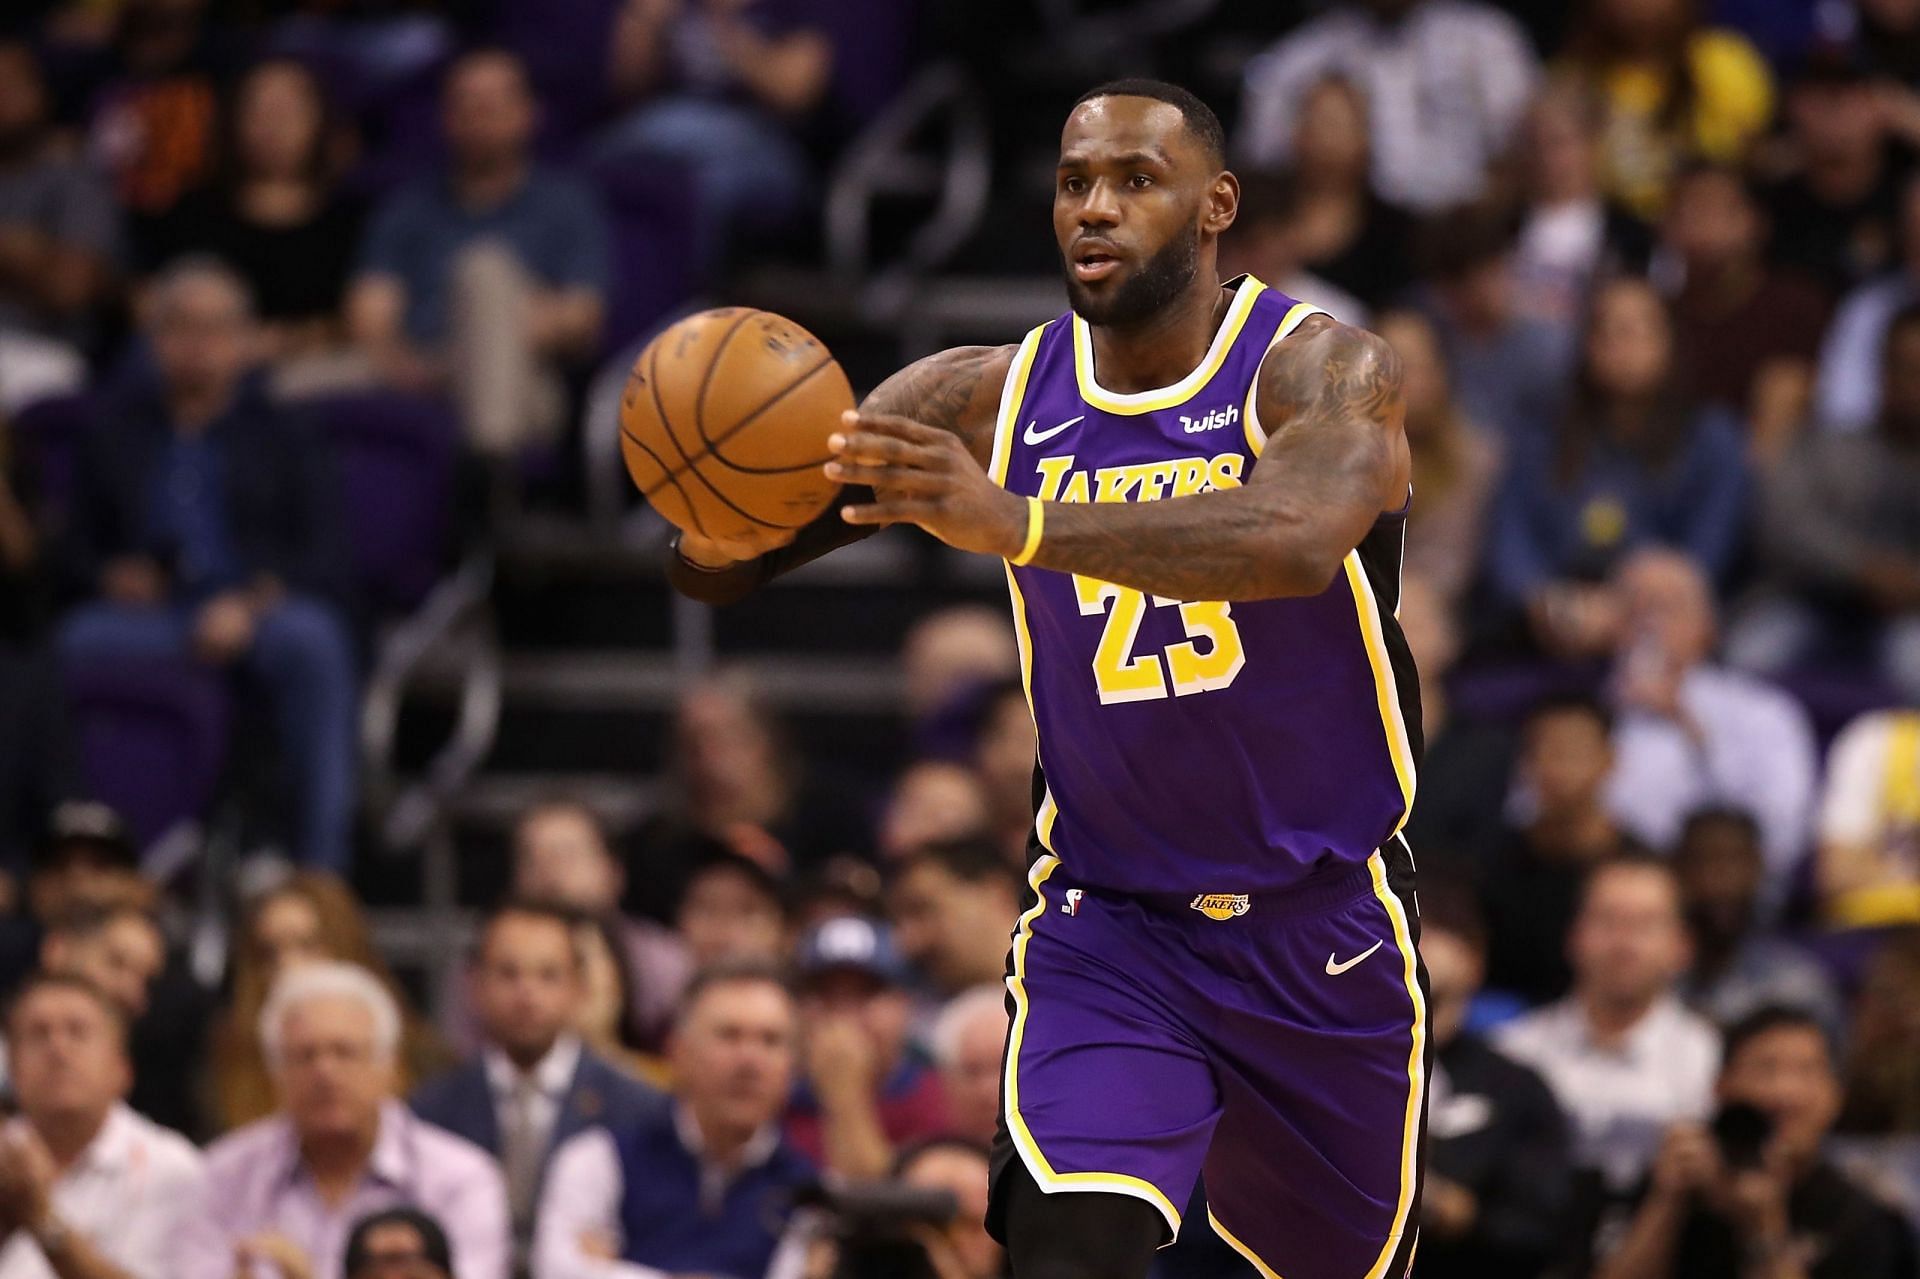 King James could move past Magic Johnson for sixth place in the all-time assists ranking and become the first player to 30K points, 10K rebounds and 10K assists. [Photo: Hoops Habit]